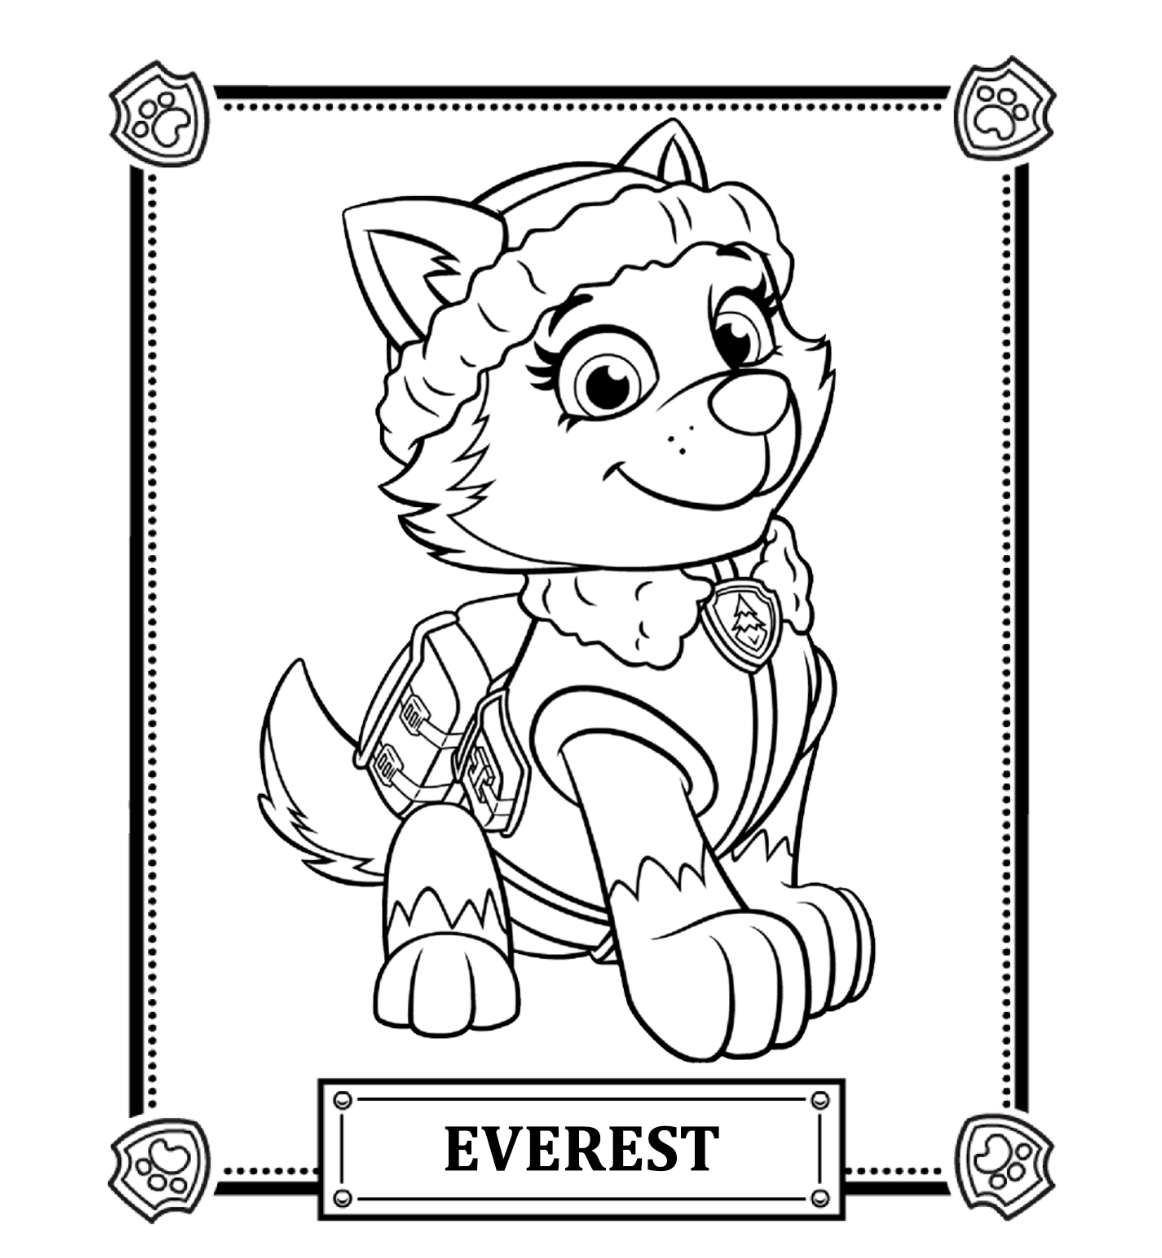 Paw Patrol Coloring Pages Best Coloring Pages For Kids Paw Patrol Coloring Paw Patrol